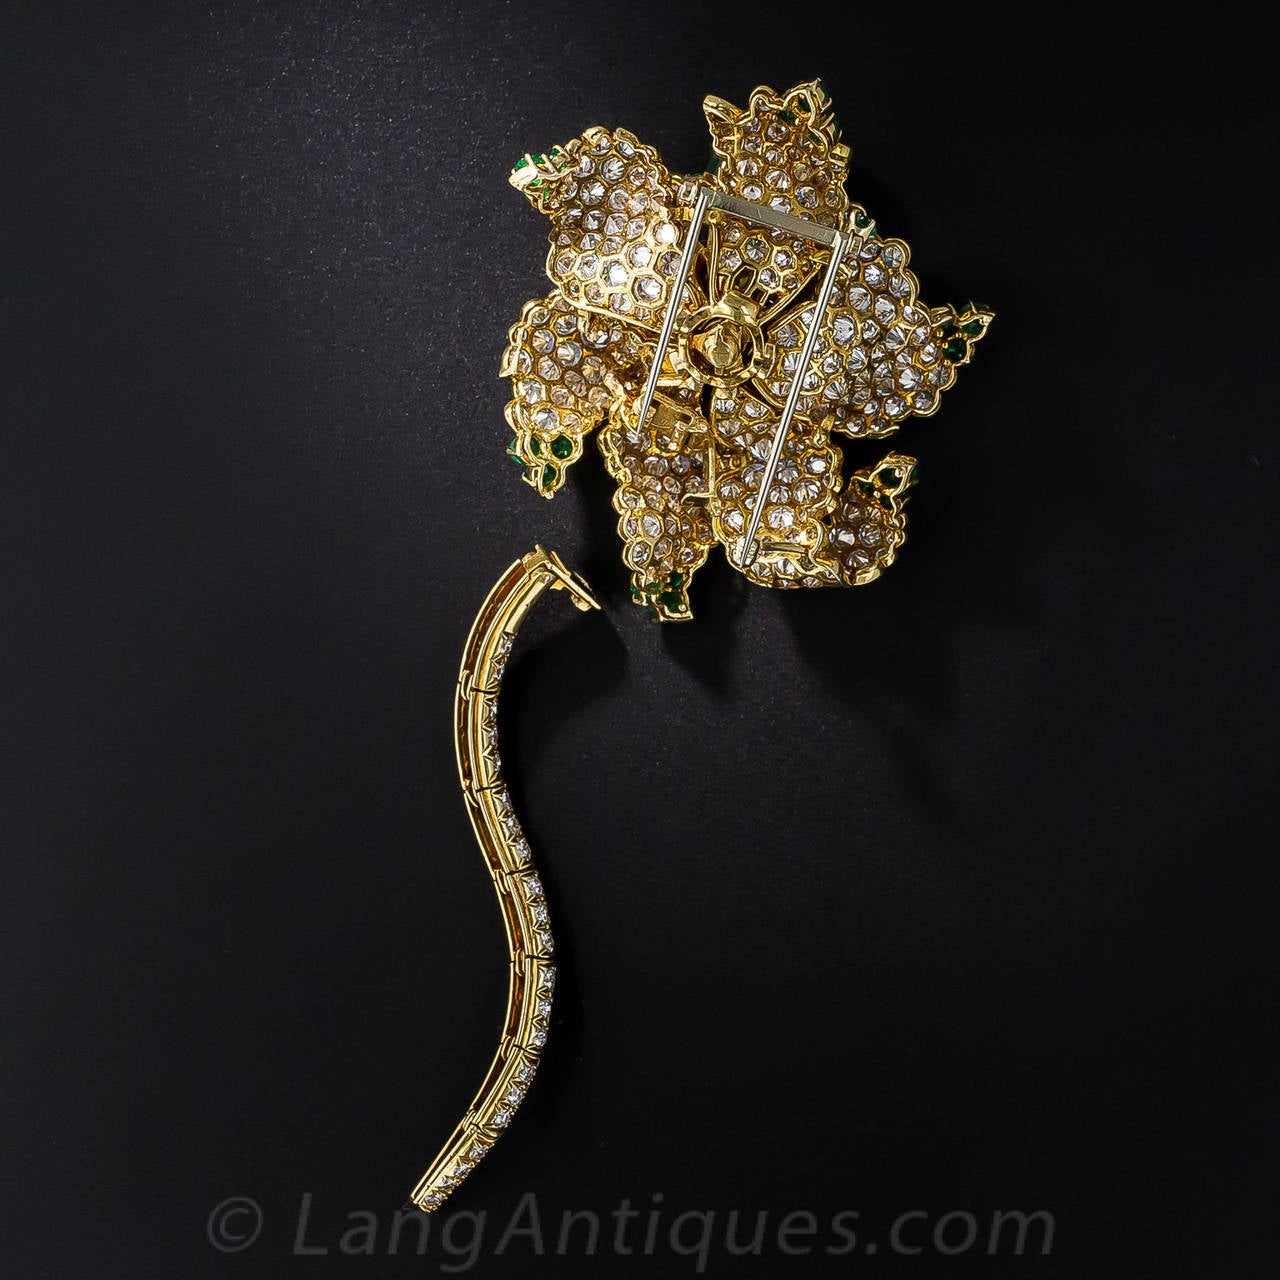 Spectacular 12 Carat Cabochon Emerald Diamond Gold Flower Brooch For Sale 1